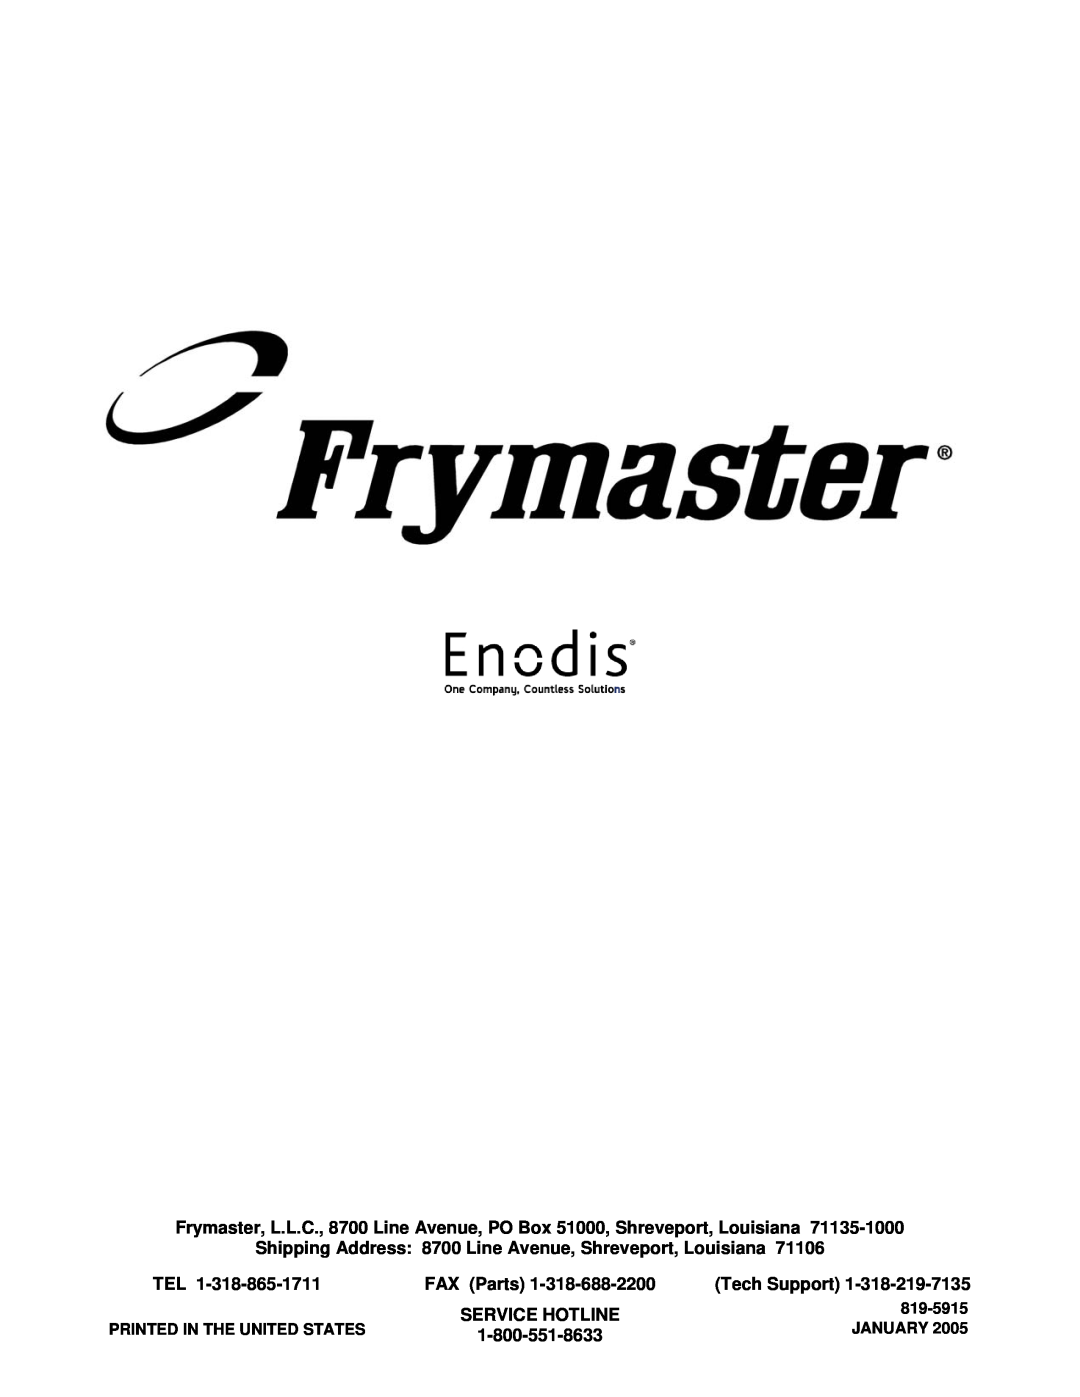 Frymaster 8195915 operation manual FAX Parts, Tech Support, Service Hotline, 819-5915, January 